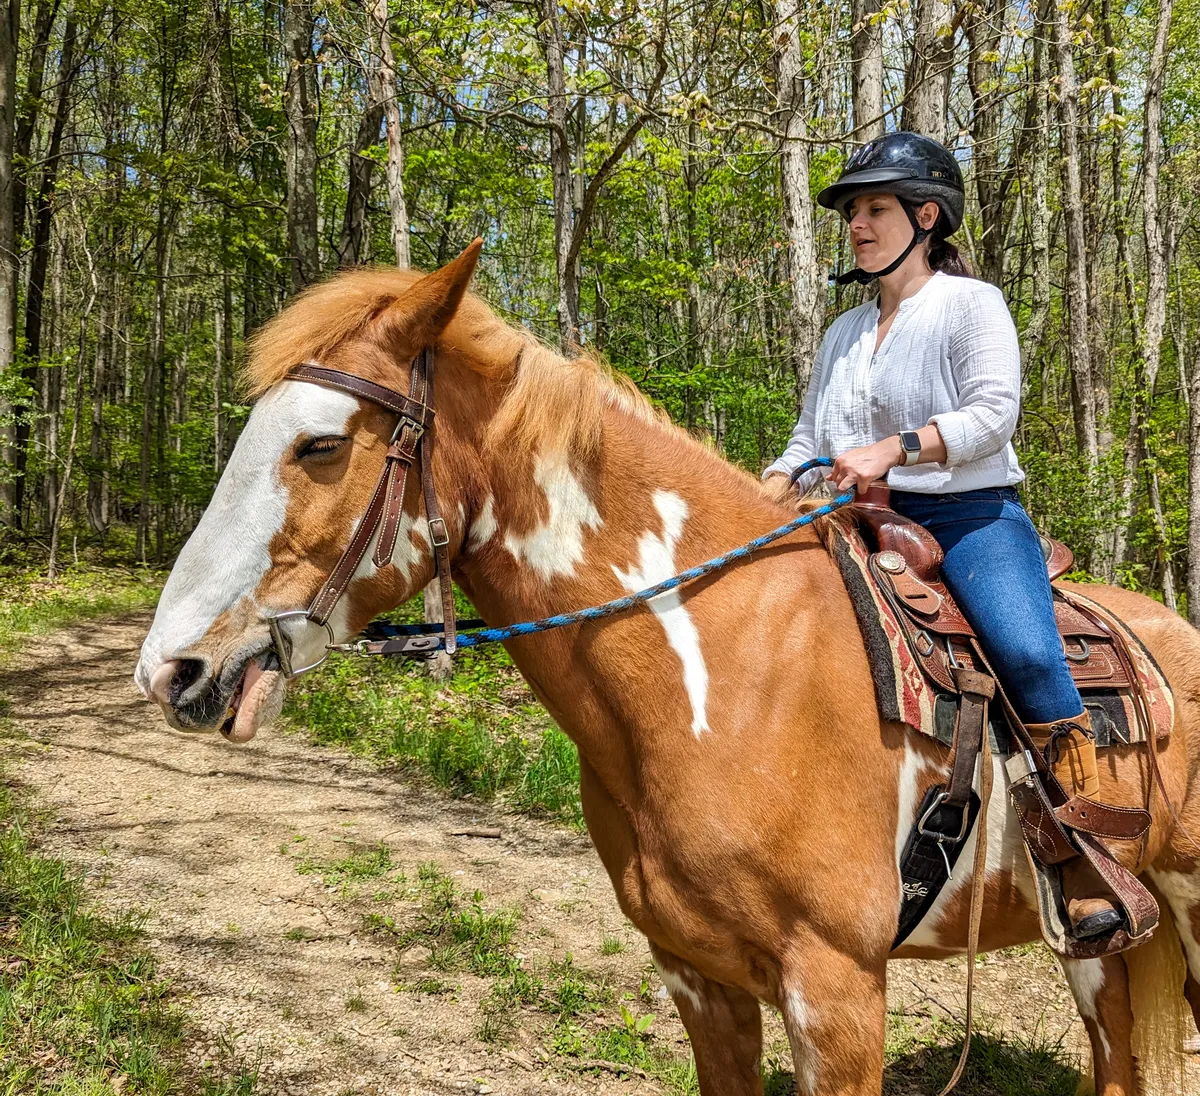 Tour the scenic beauty of the Pennsylvania Laurel Highlands on horseback at Nemacolin. A woman on a horse on wooded trail. 